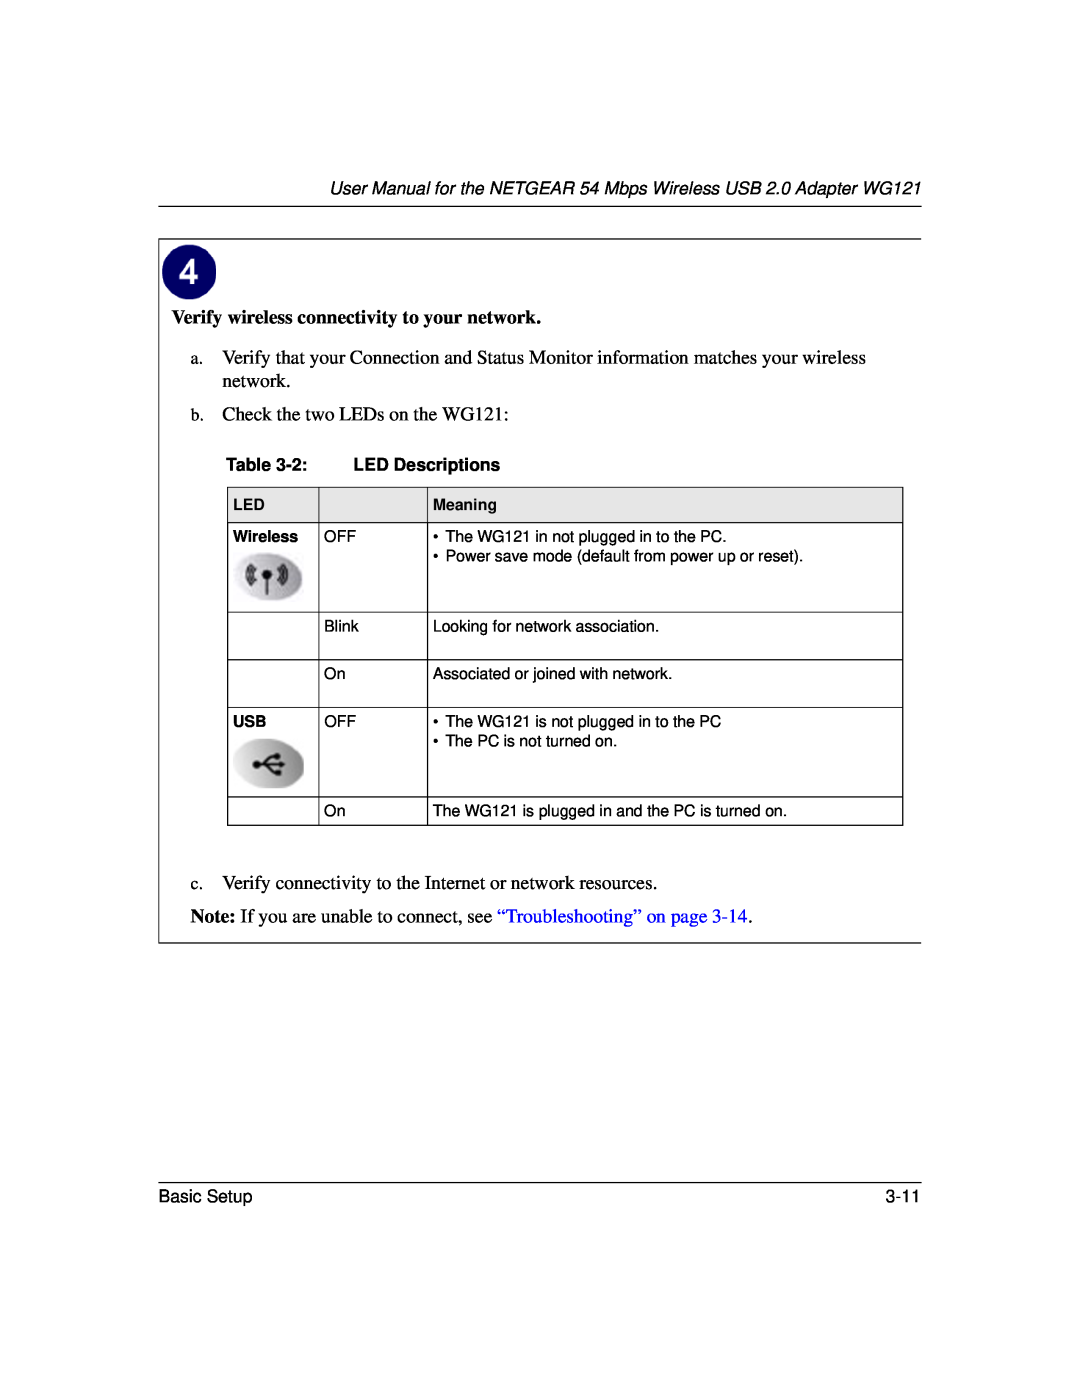 NETGEAR WG121 user manual Verify wireless connectivity to your network 